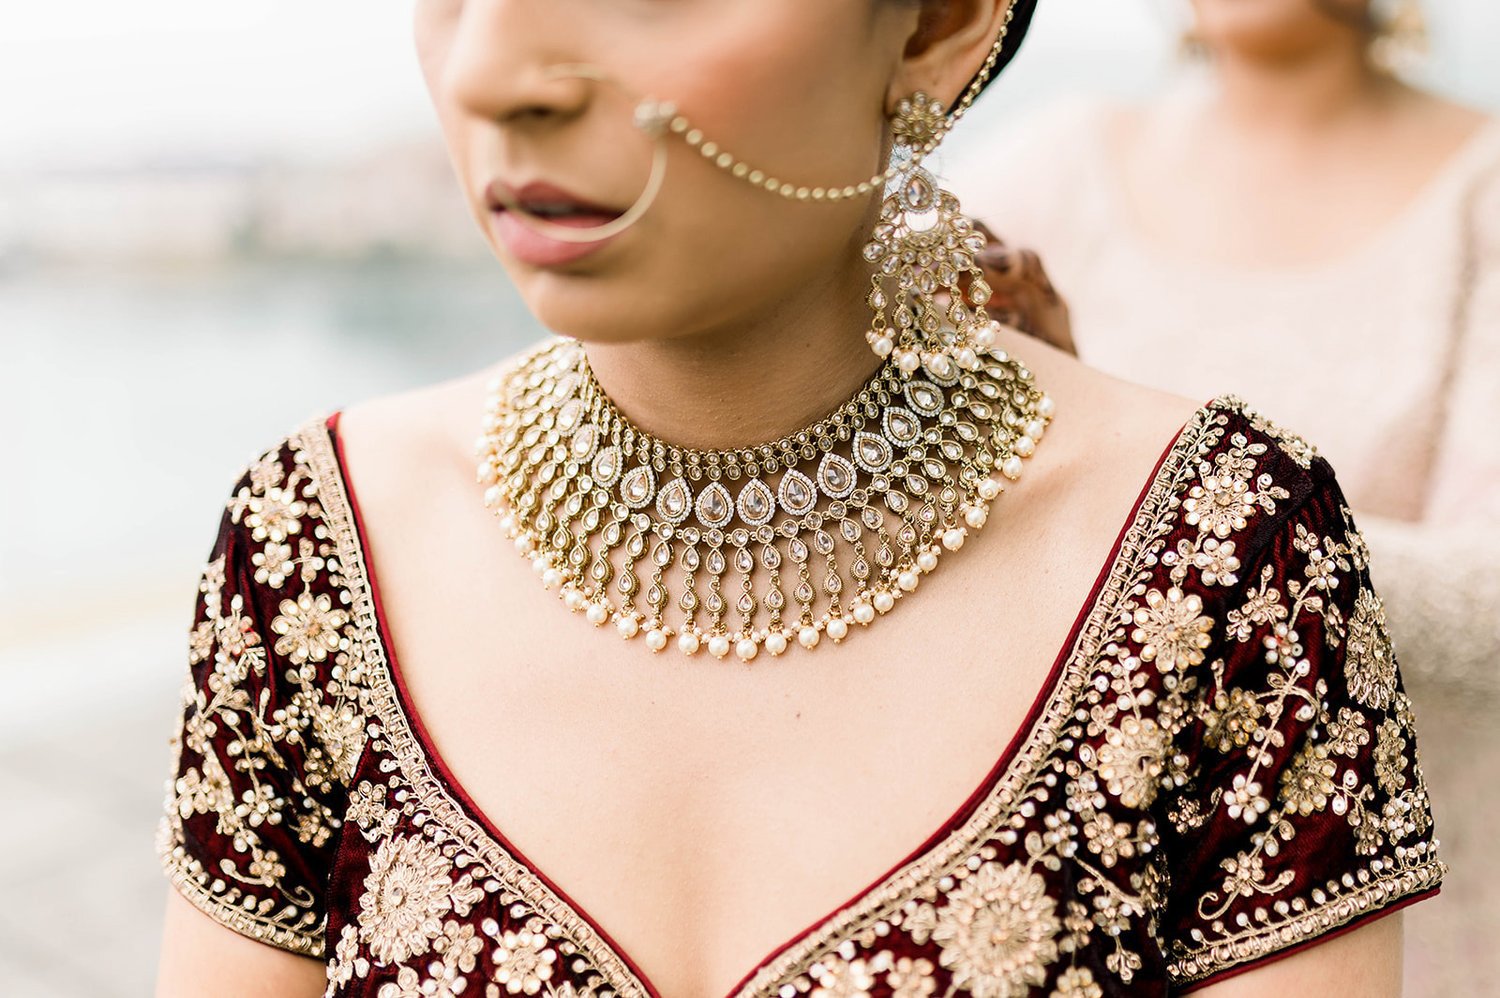 Sister of the bride drapes bride in large gold necklace on the morning of her south asian wedding ceremony in Victoria BC